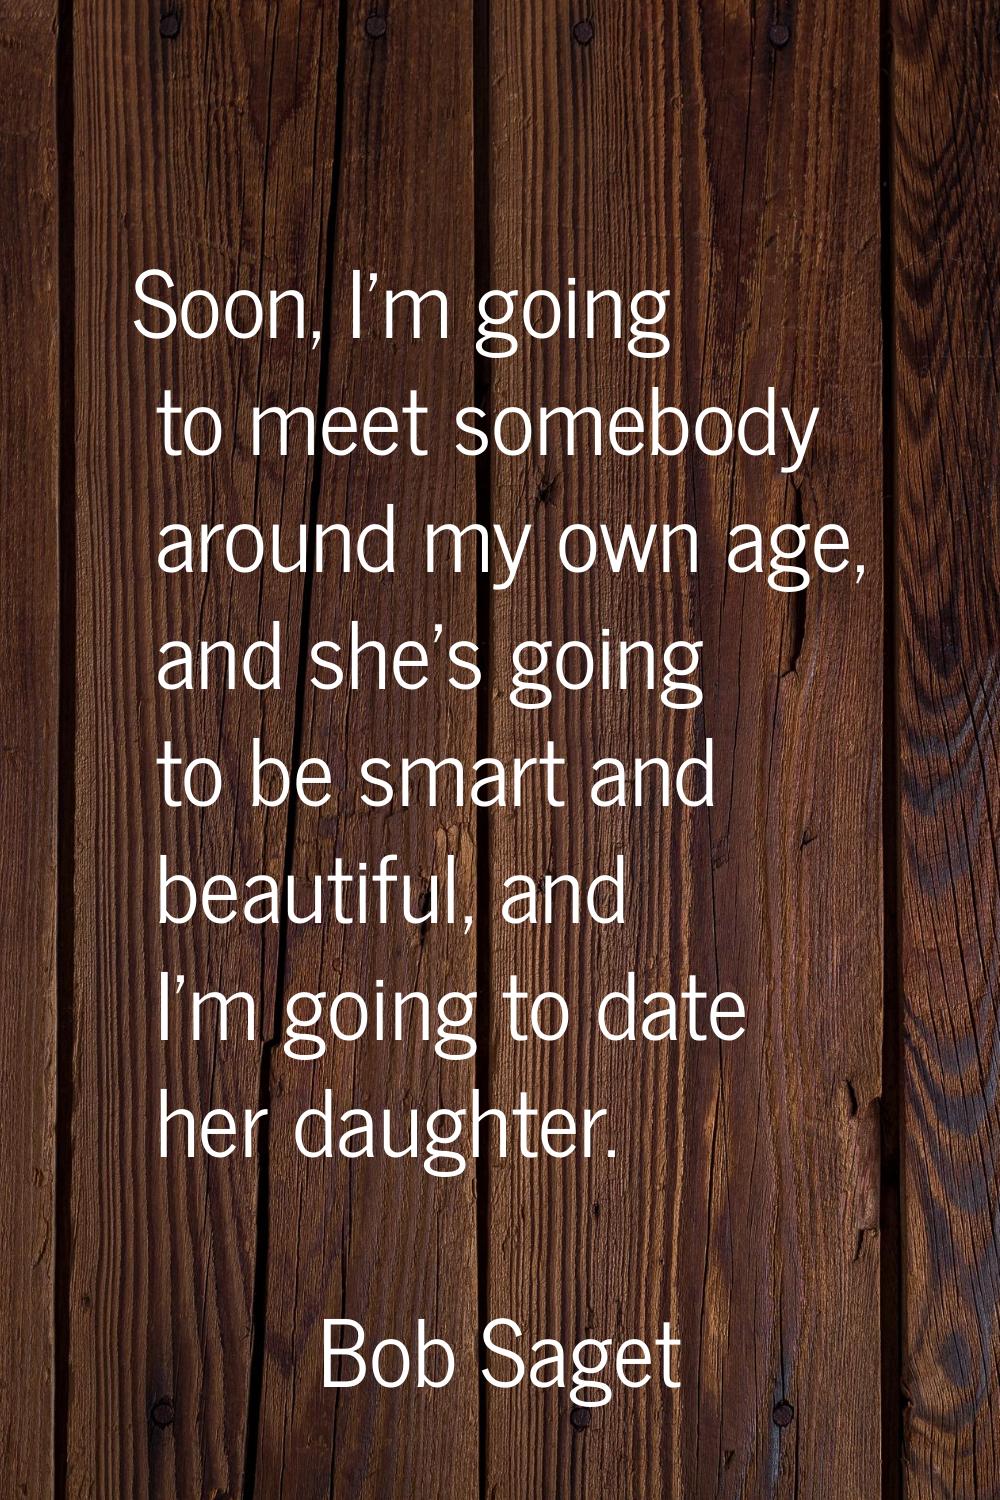 Soon, I'm going to meet somebody around my own age, and she's going to be smart and beautiful, and 